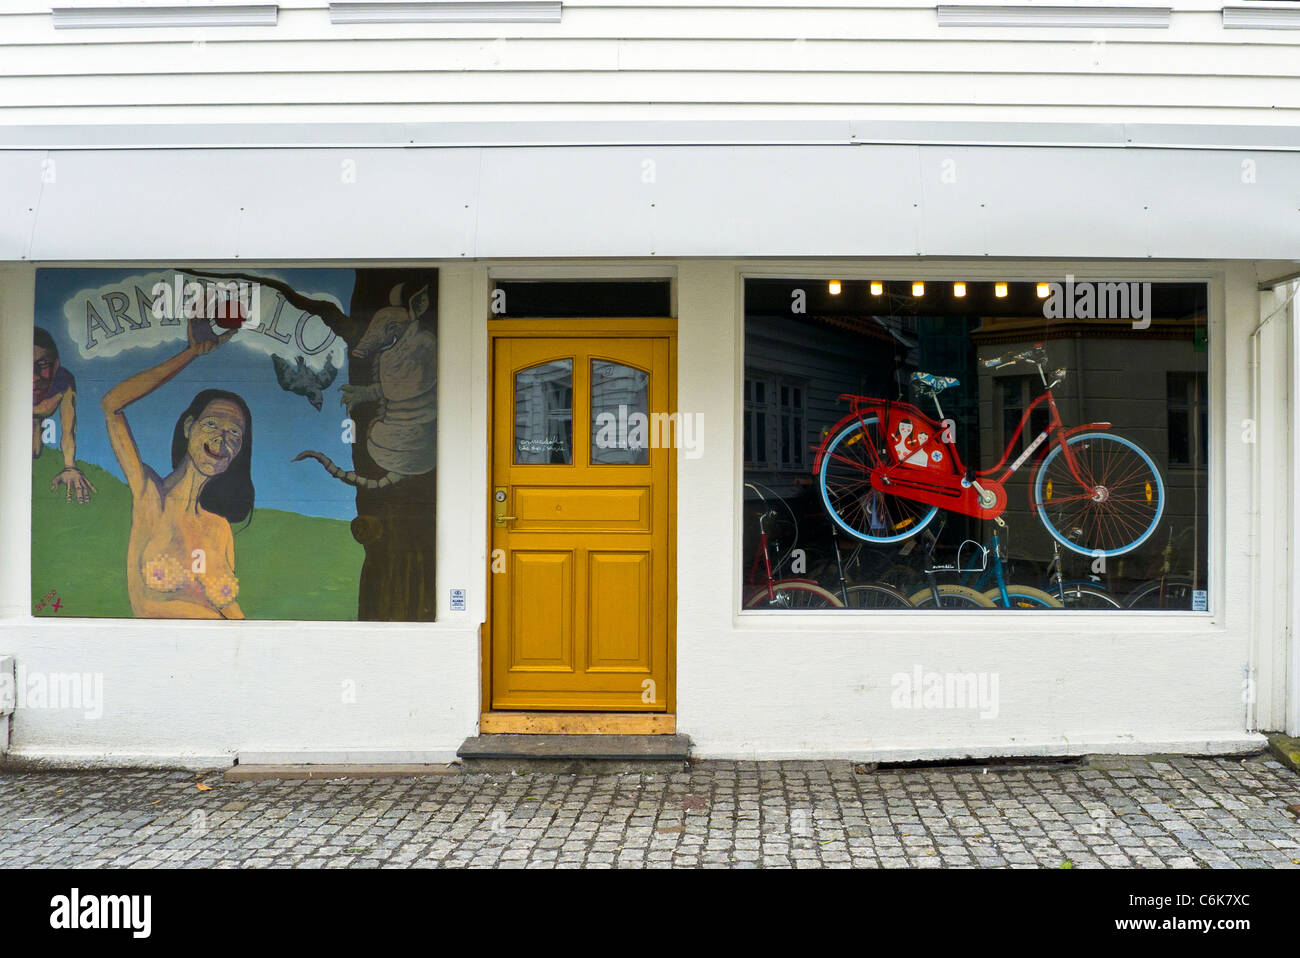 A Cycle shop with an artistic front of shop design, Bergen, Norway Stock Photo